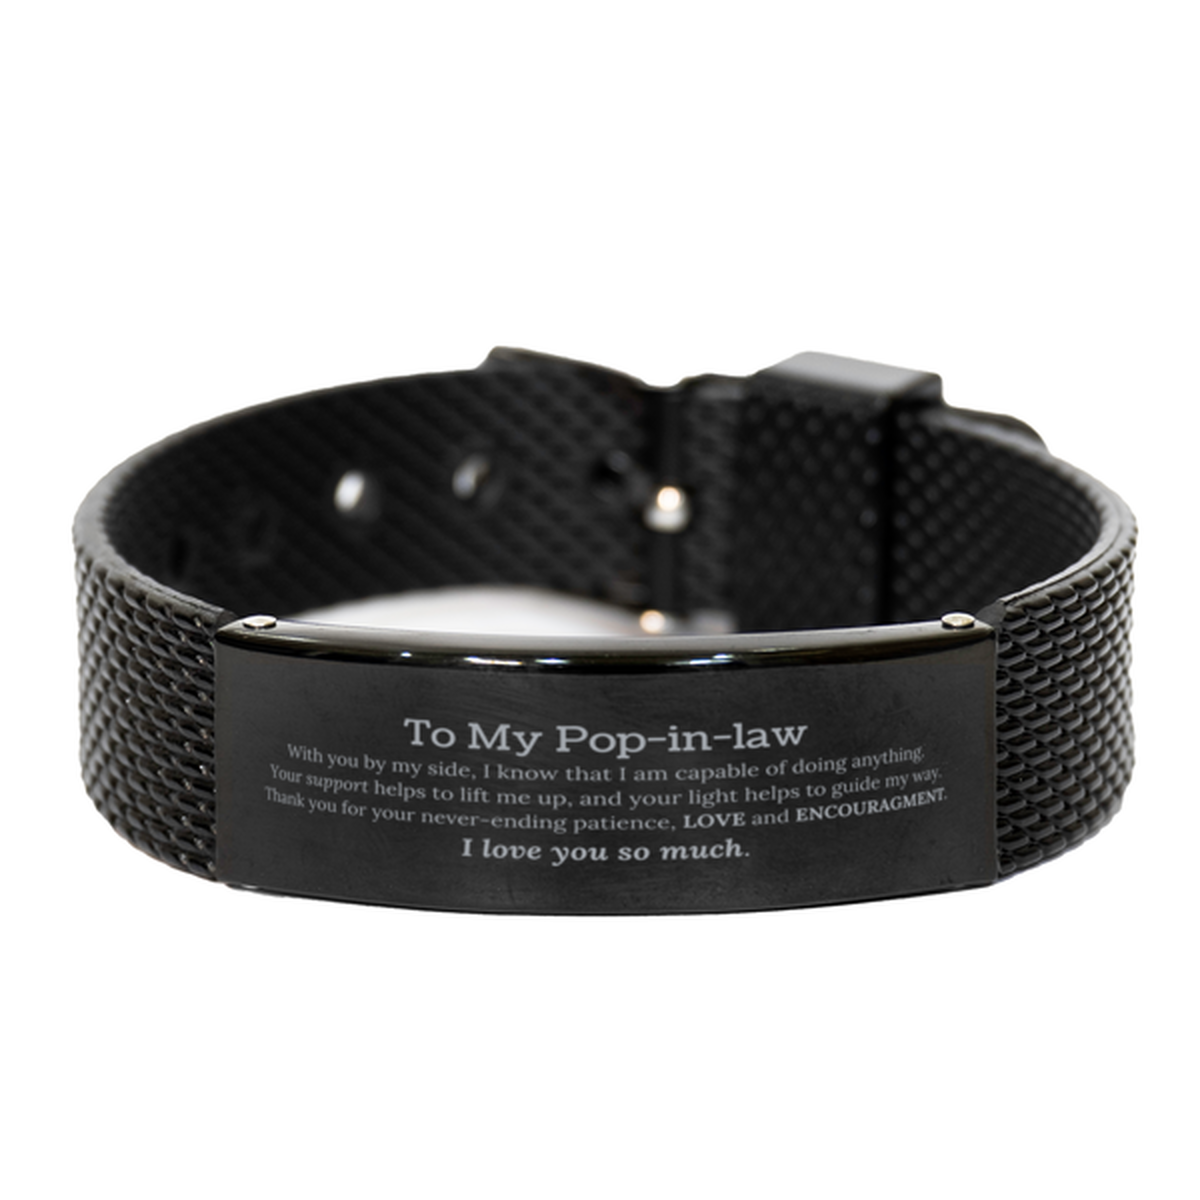 Appreciation Pop-in-law Black Shark Mesh Bracelet Gifts, To My Pop-in-law Birthday Christmas Wedding Keepsake Gifts for Pop-in-law With you by my side, I know that I am capable of doing anything. I love you so much